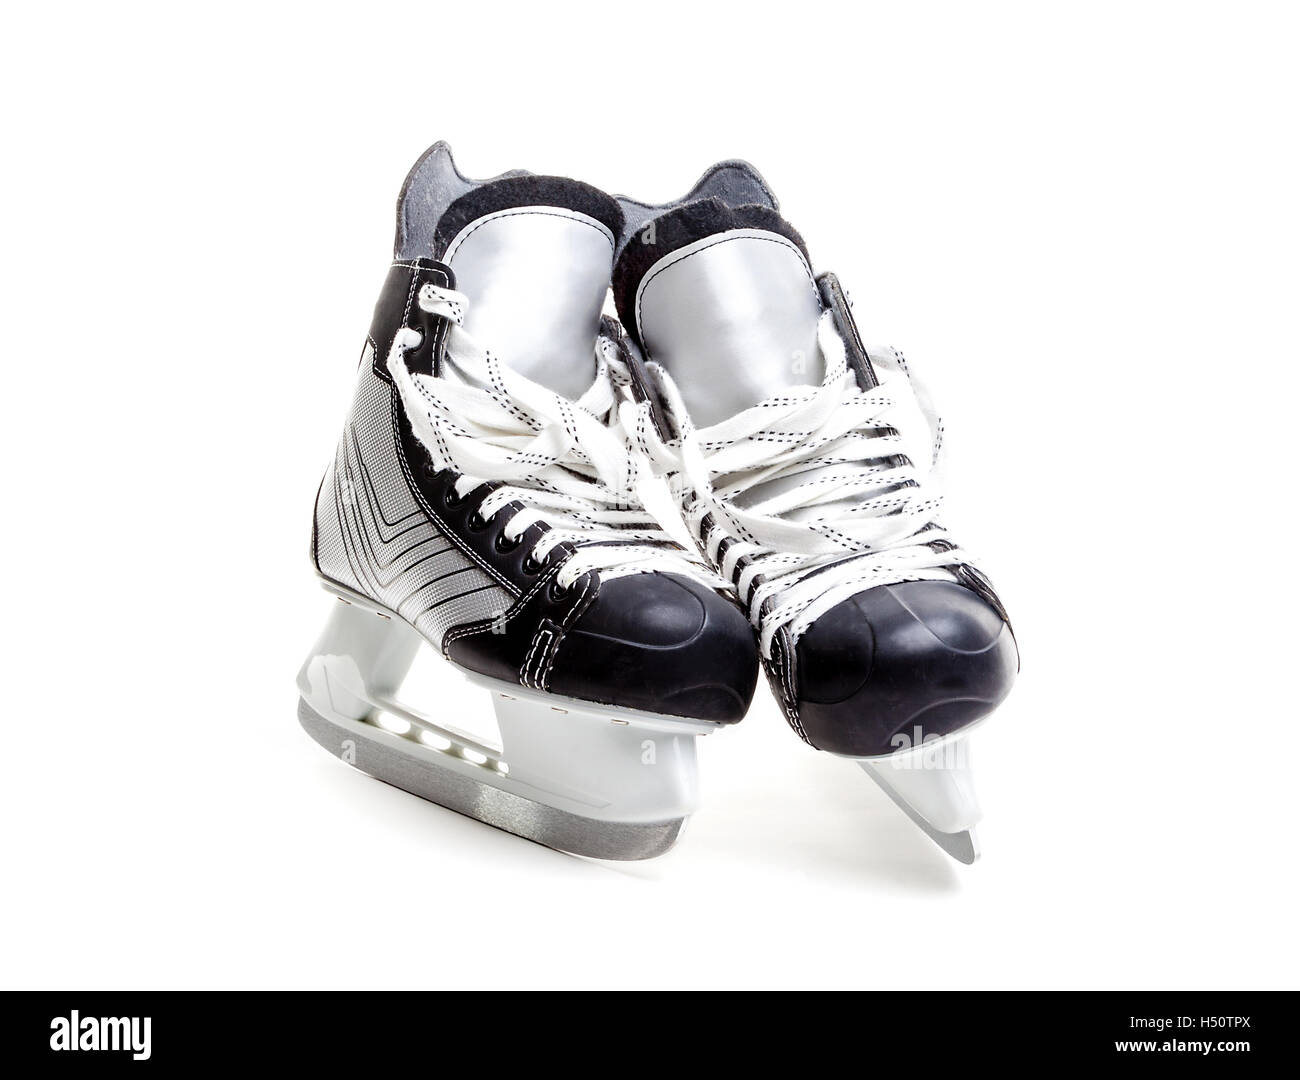 Close up on a pair of ice hockey skates with loose laces isolated on white background with copy space. Stock Photo